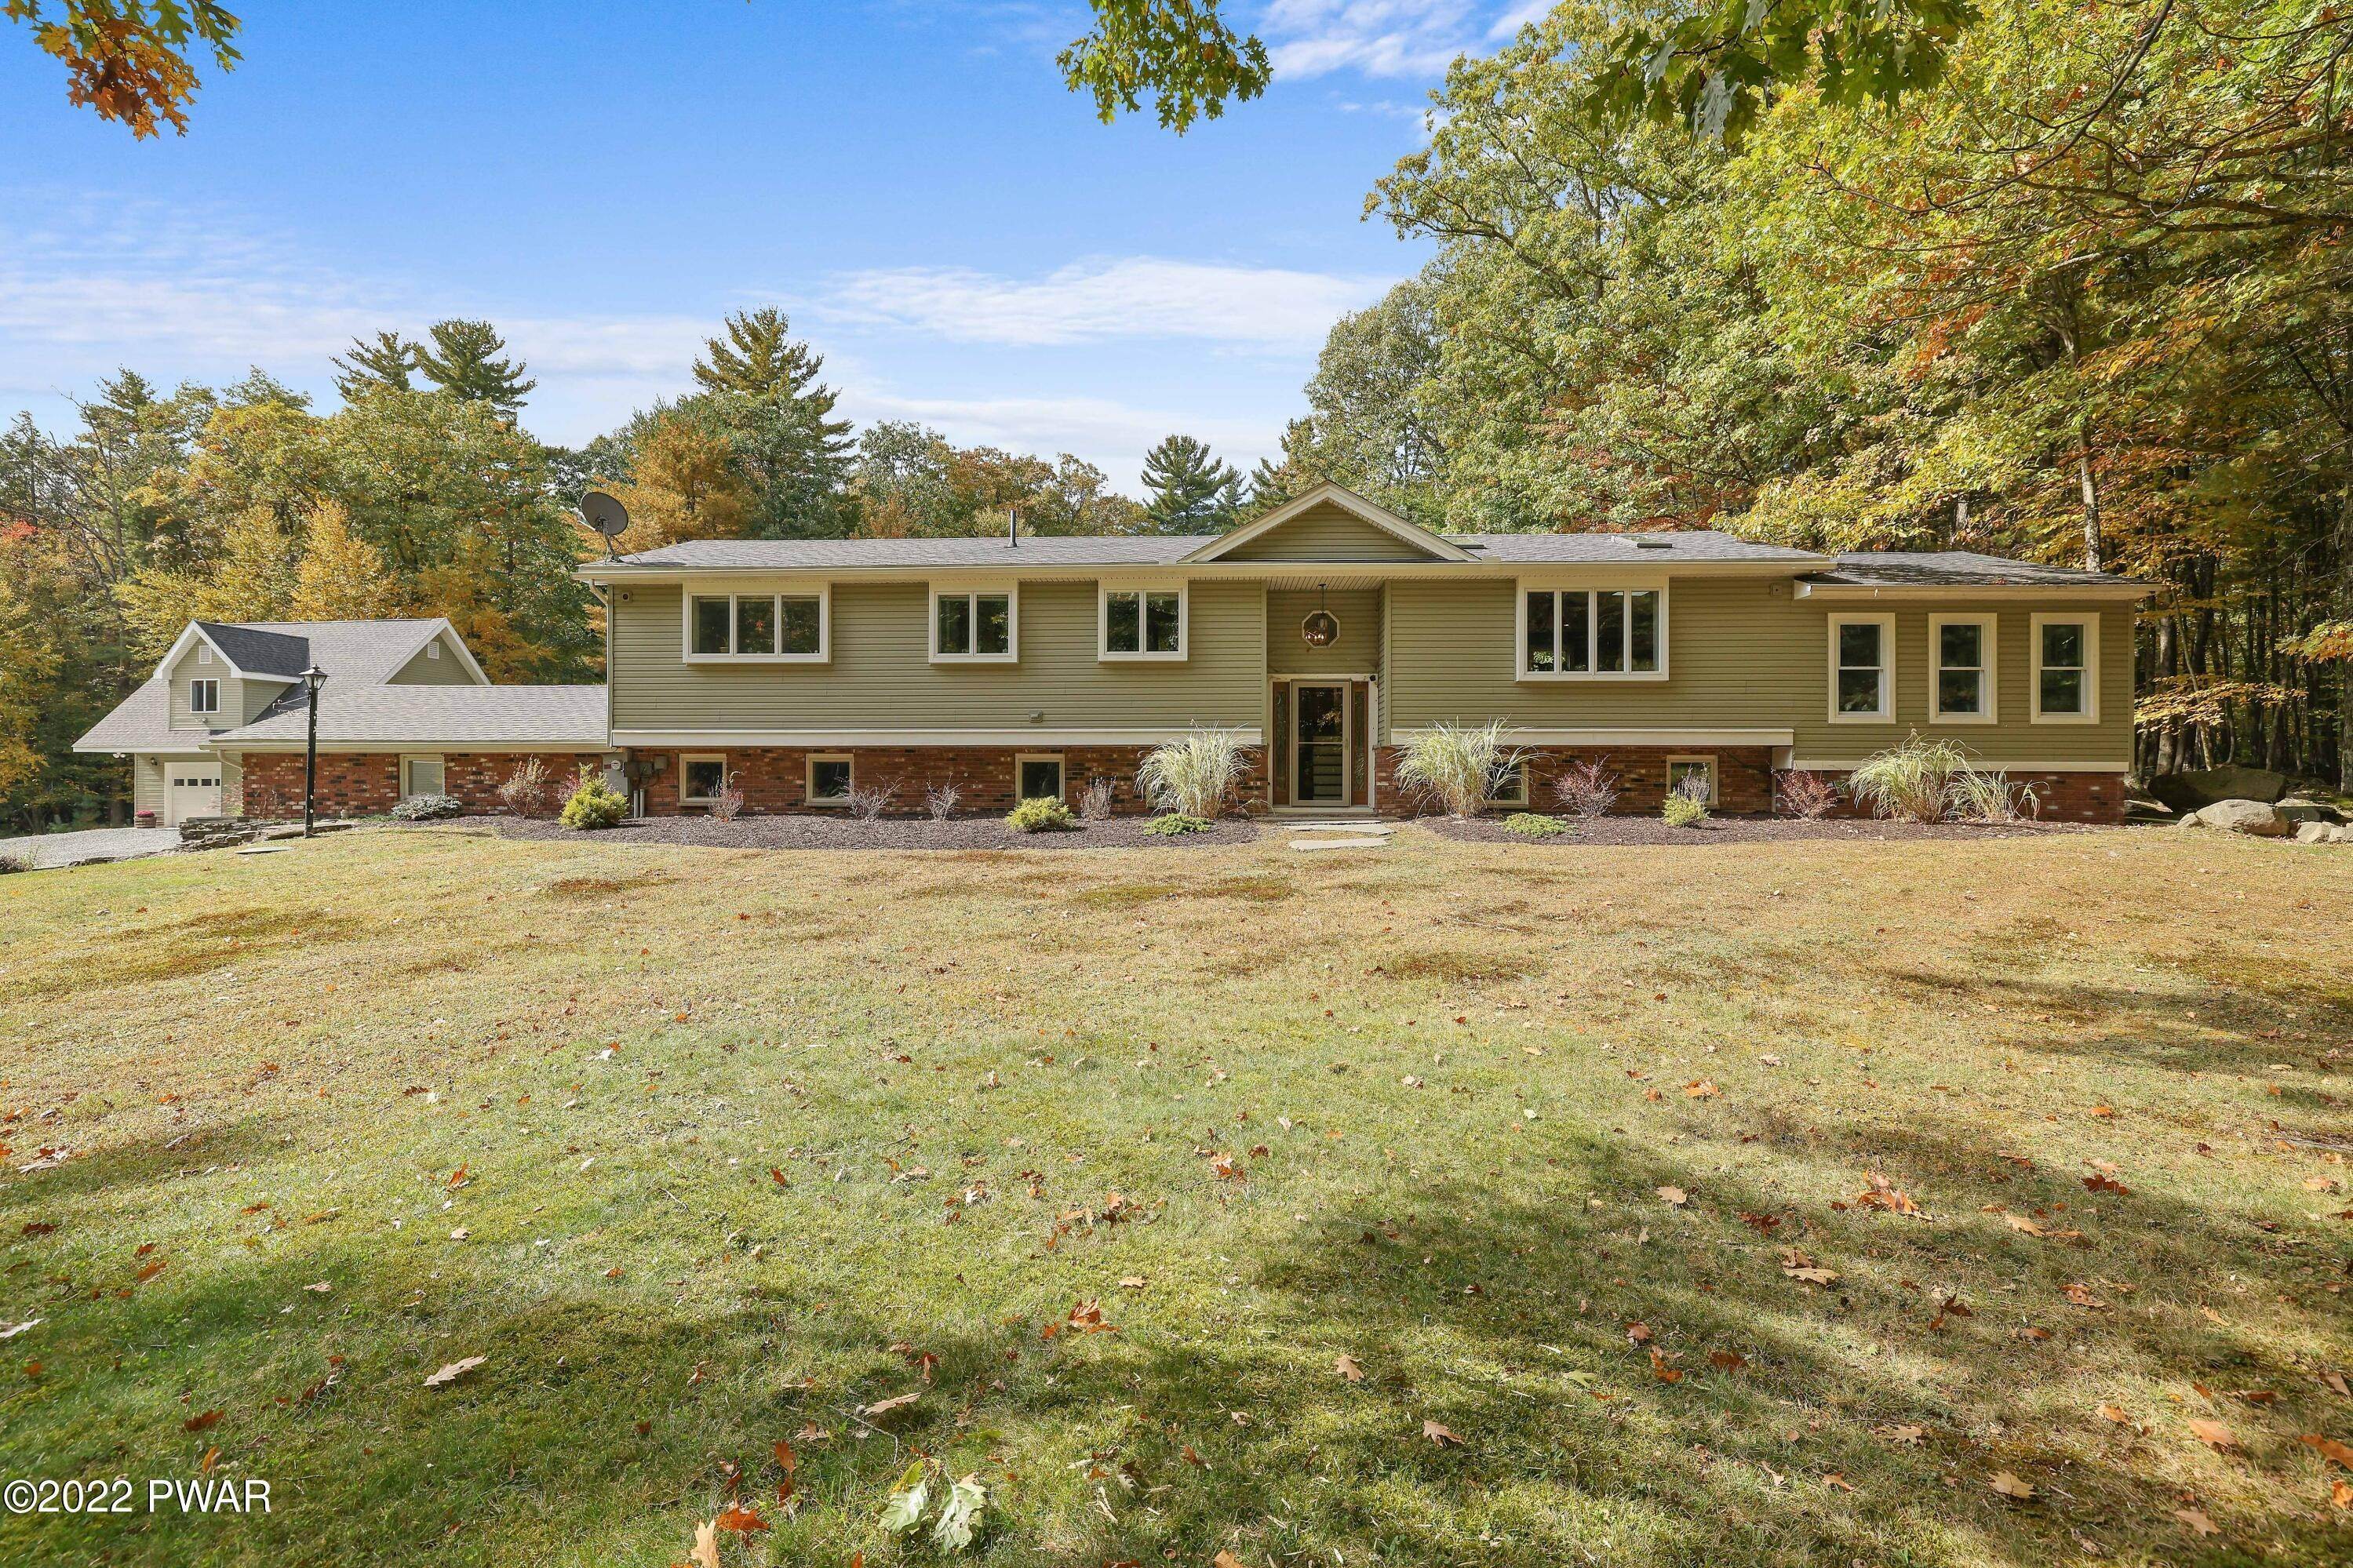 Property for Sale at 101 S Wynd Dr Lakeville, Pennsylvania 18438 United States